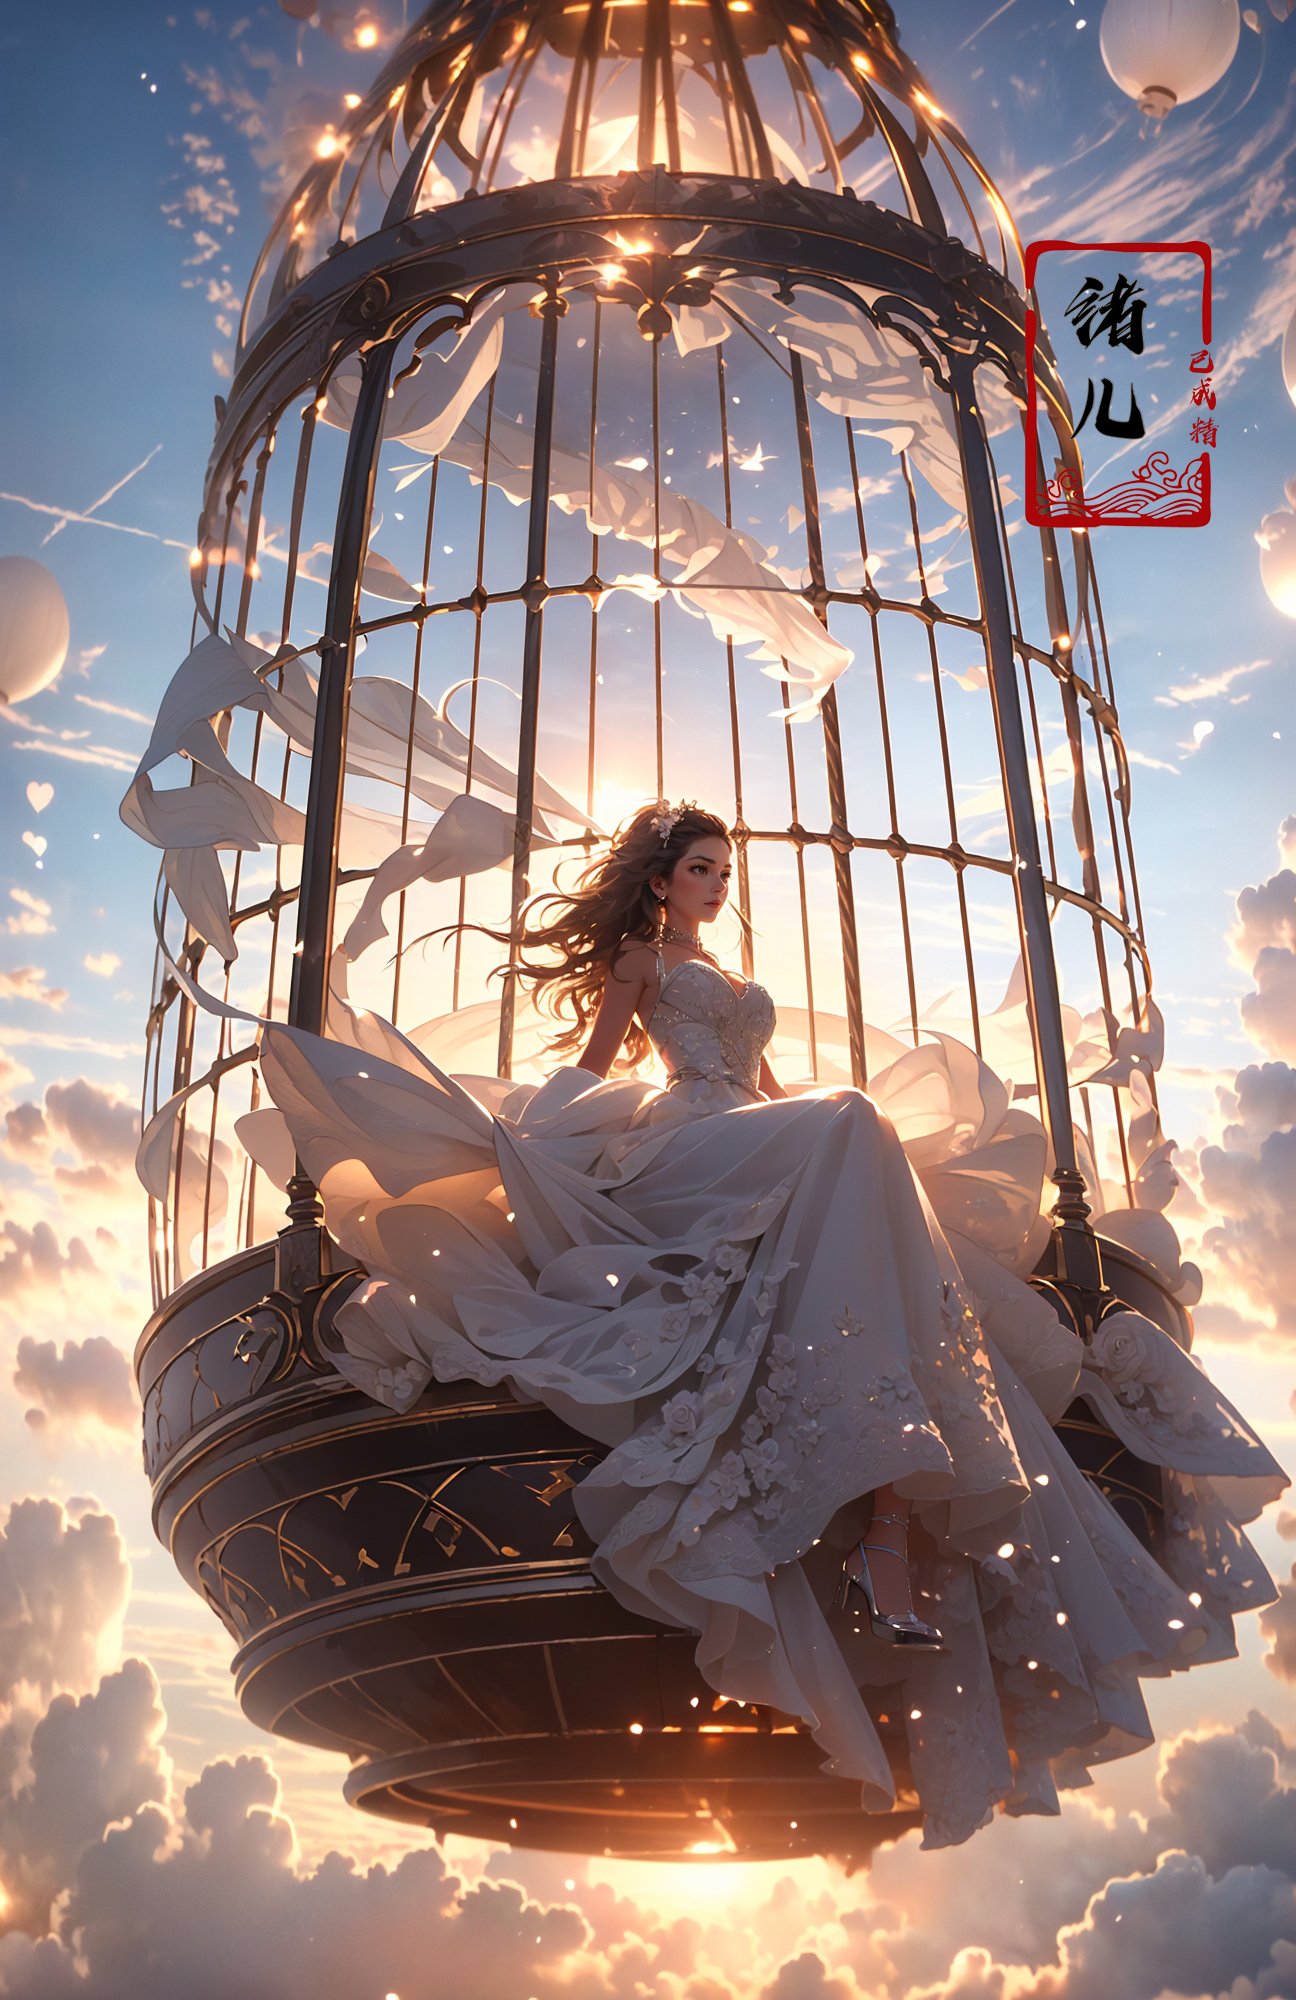 A beautiful woman with an angelic face on a hot air Huge birdcage, Huge birdcage drifts above above clouds, awed by the beauty below and, GoPro, motion blur, long exposure, full body, delicate features, high aesthetics and high art, immersed ina cinematic atmosphere, with an unreal portrait style, Paulina Washington, Chinese, realism, martial arts, Play light and shadow, Green light and shadow, Bauhaus photography, 28mm fantasy landscape, Camille Cloud, Selective focus, Panorama，(dramatic, gritty, intense:1.4),masterpiece, best quality, 32k uhd, insane details, intricate details, hyperdetailed, hyper quality, high detail, ultra detailed, Masterpiece,bridal veil，wedding dress，(Birdcage，Huge birdcage:1.4)，<lora:绪儿-热气球stage:0.8>